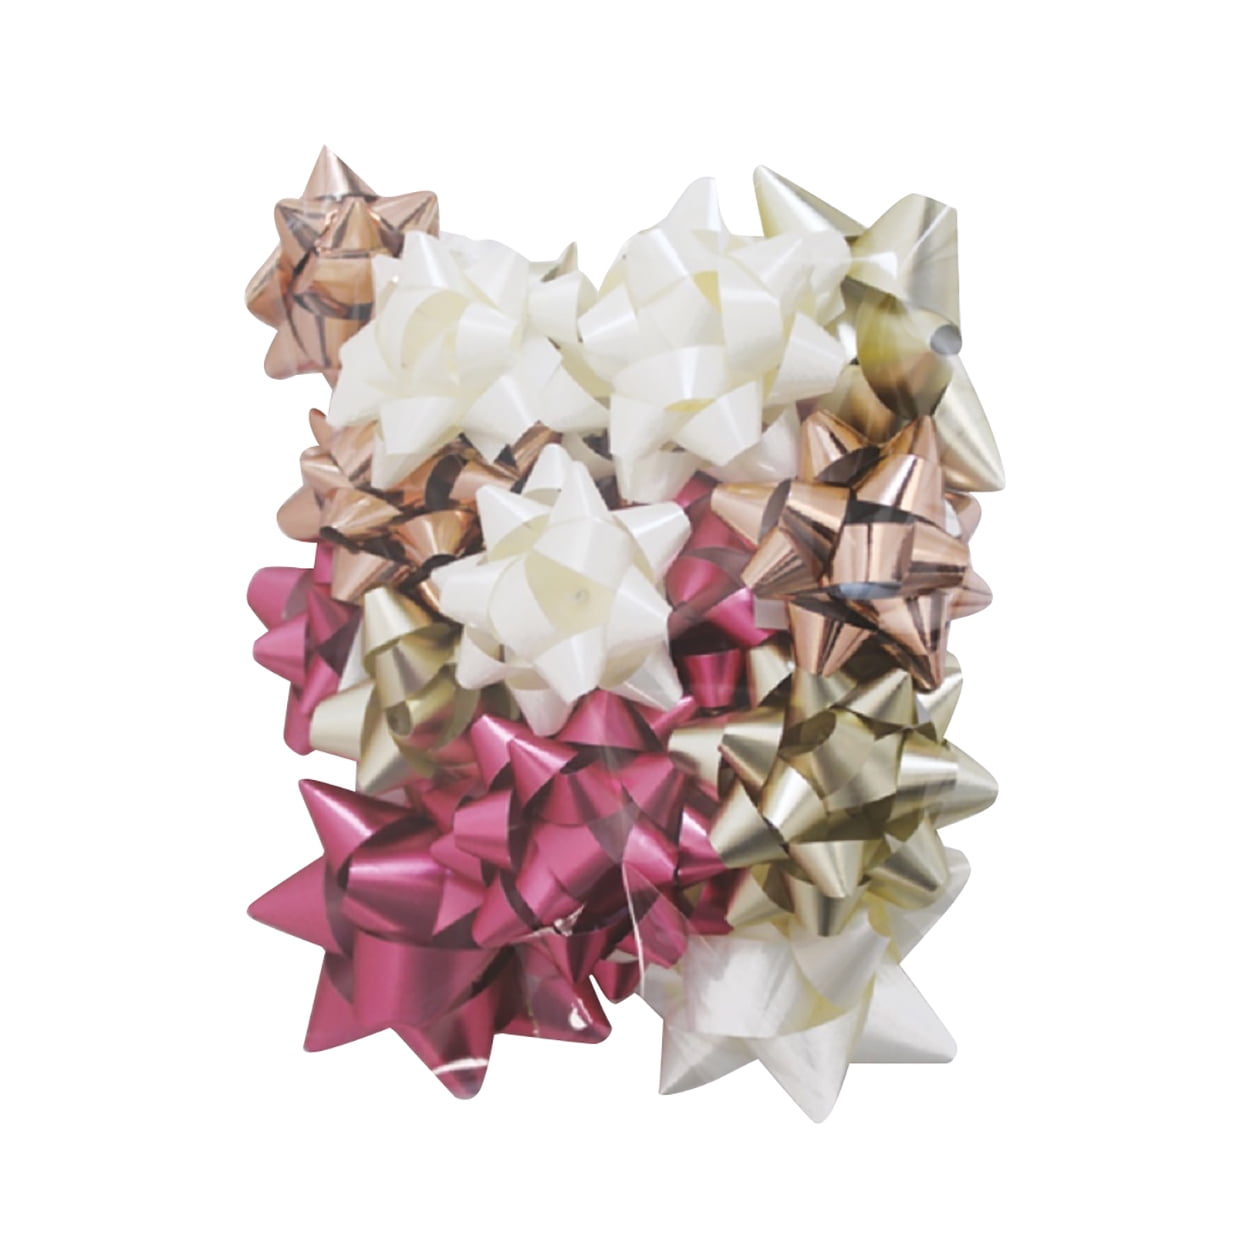 The Home Fusion Company Large Or Small Luxury Metallic Foil Gift Bows Gold Silver White Blue Christmas Xmas